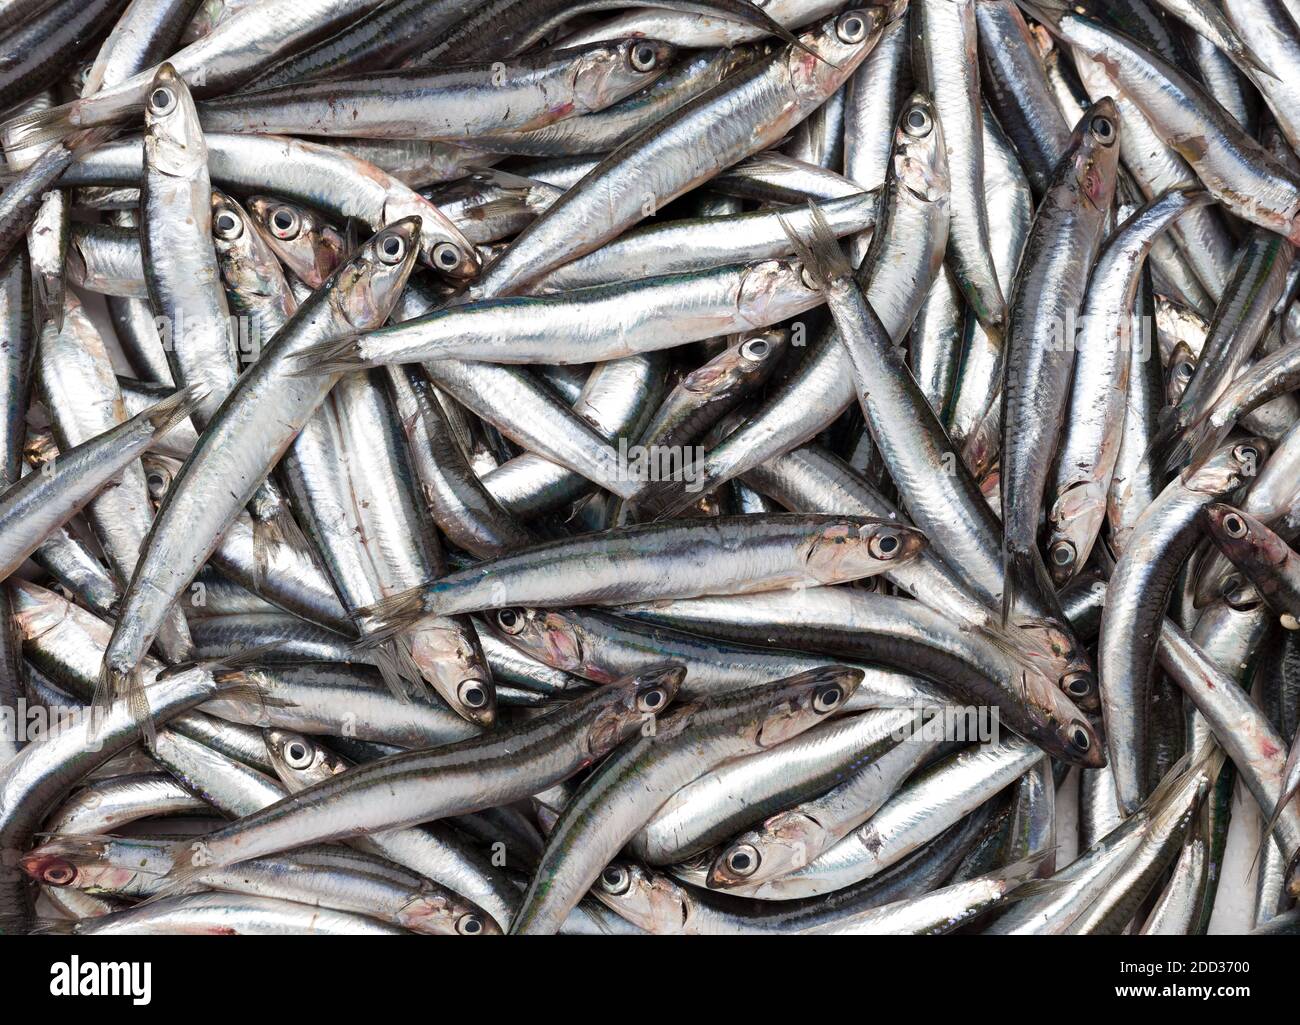 raw anchovy fish Stock Photo